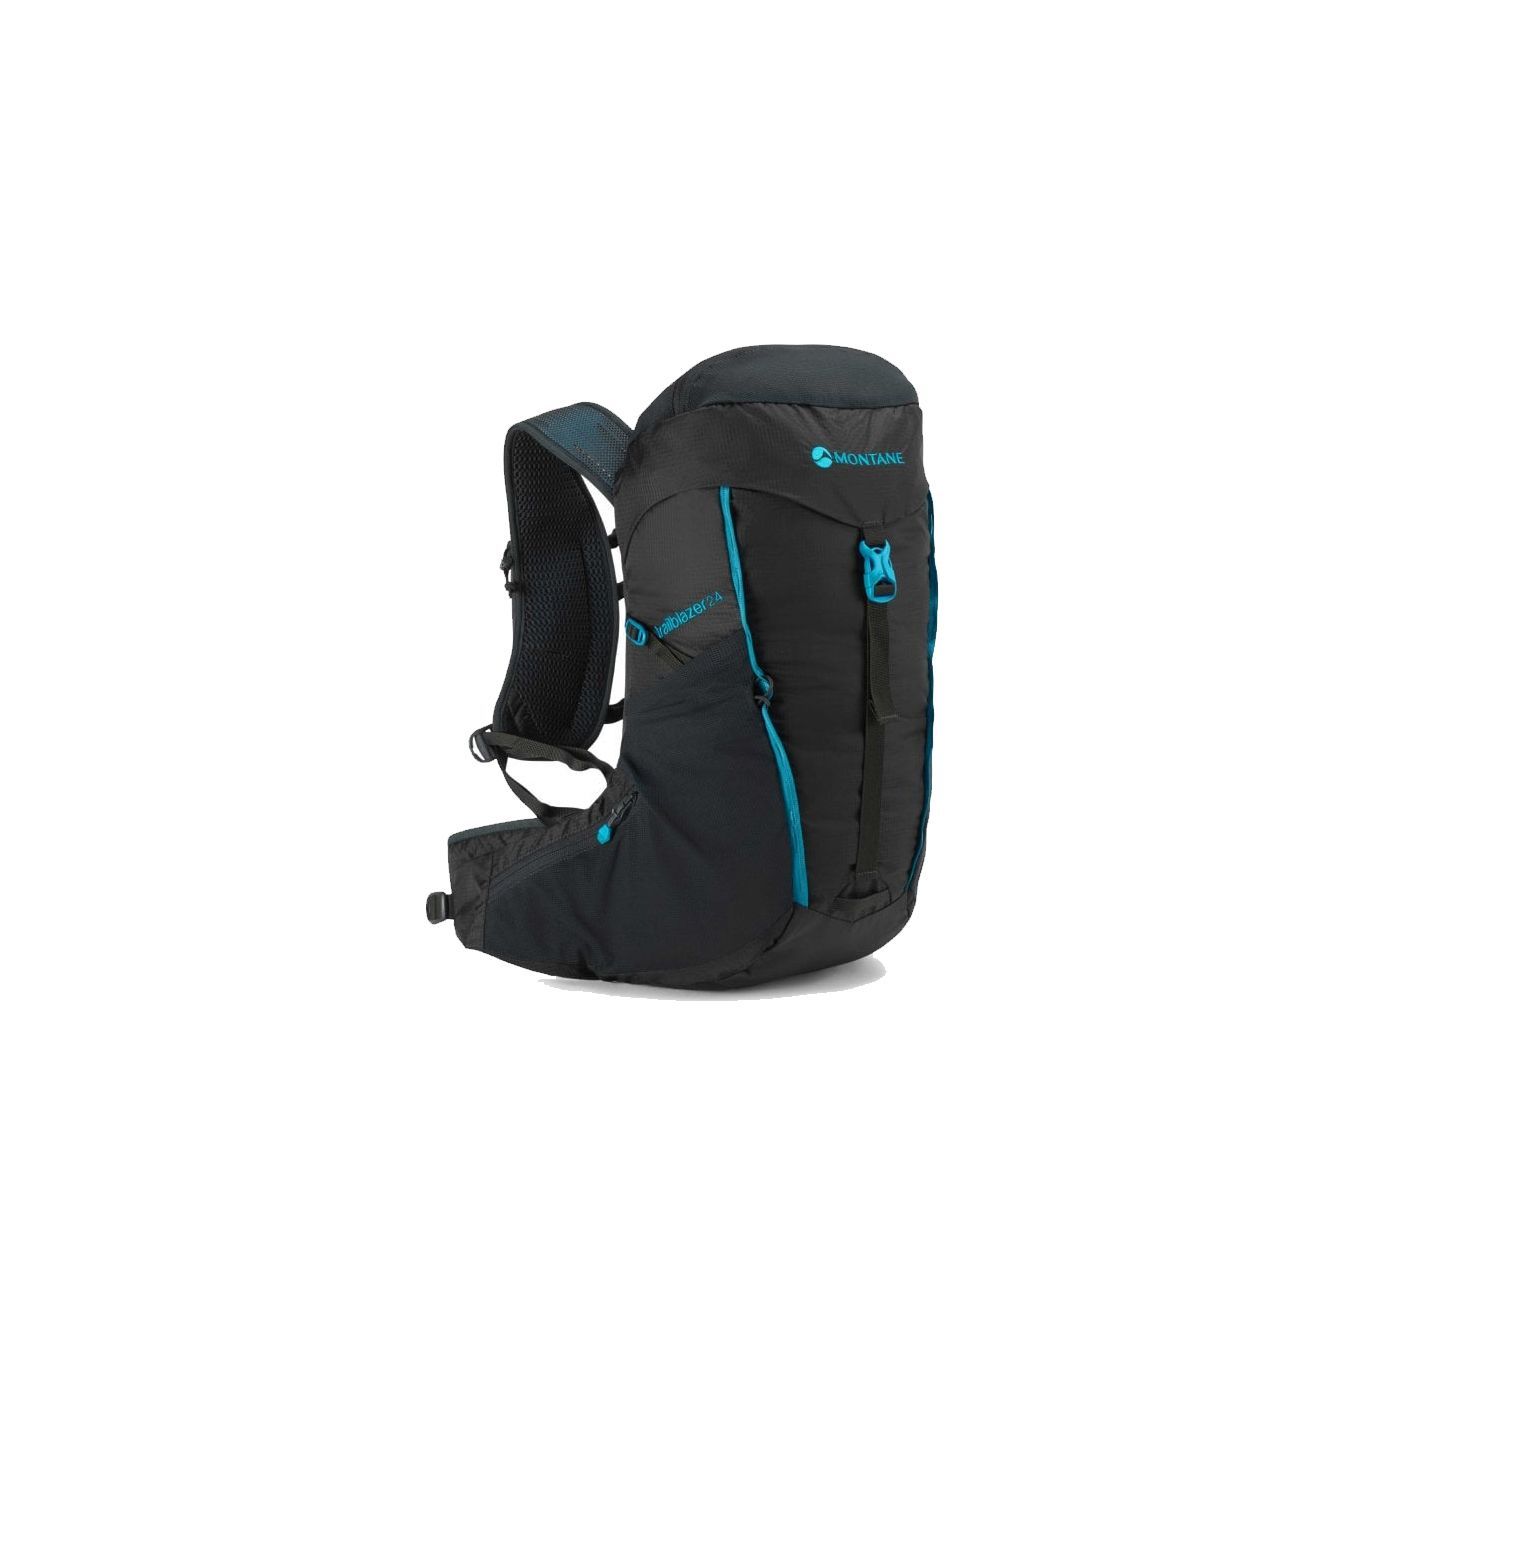 New Montane Switch 20 Daypack 